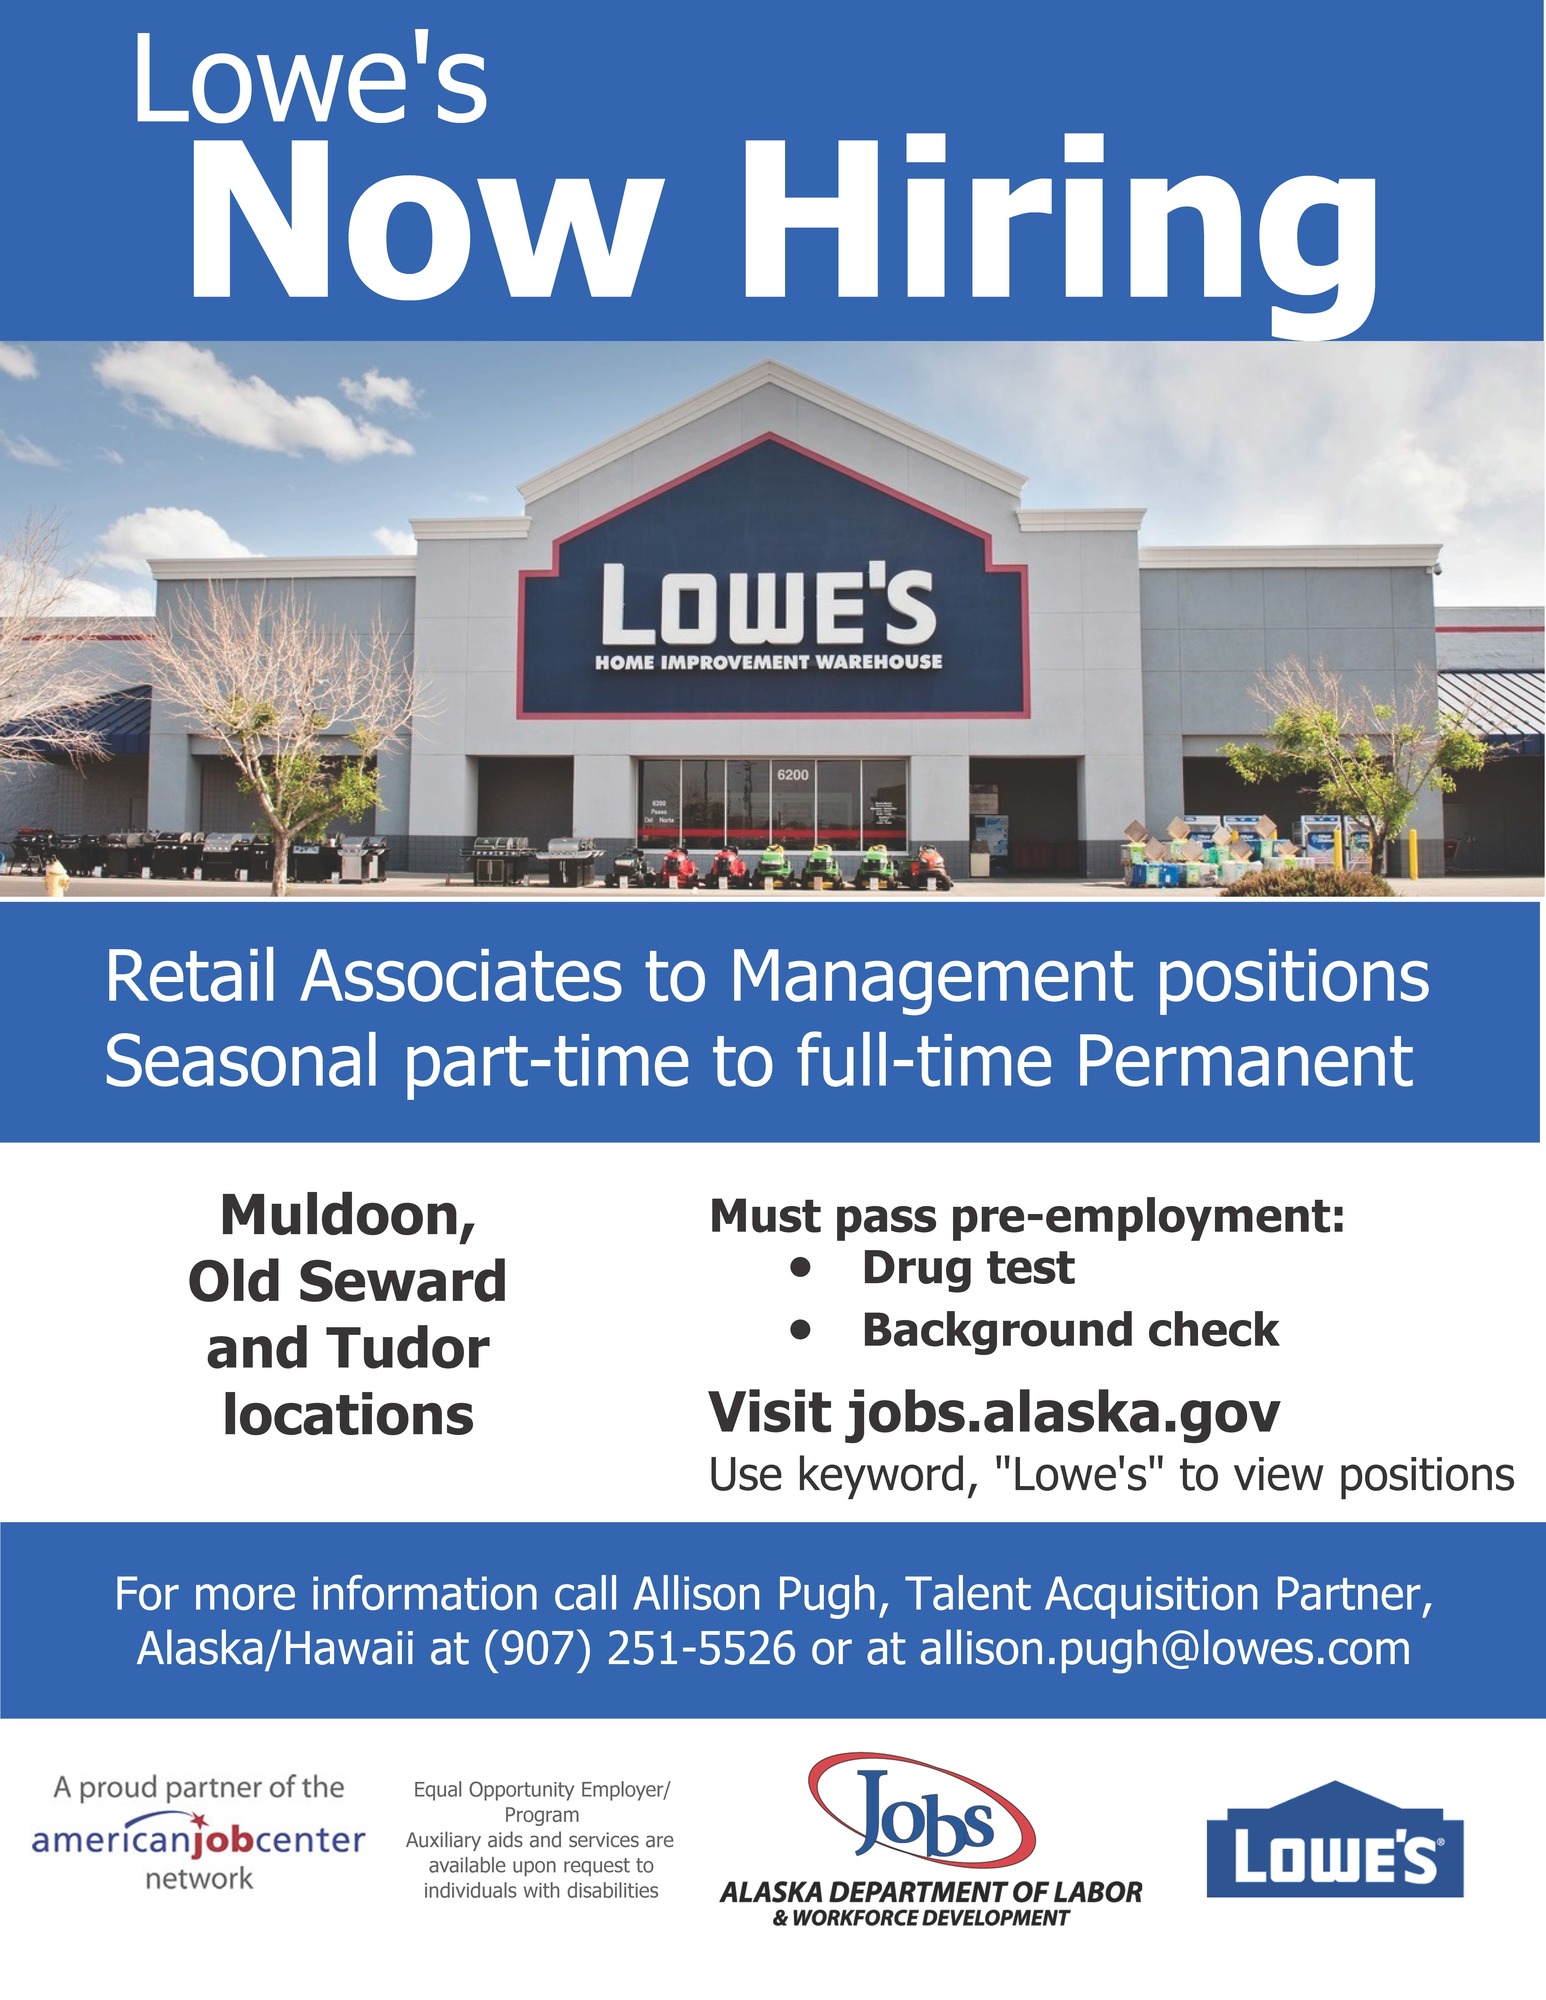 Lowe's Now Hiring Retail Associates to Management positions Seasonal P/T to F/T Permanent at their Muldoon, Old Seward Highway and Tudor locations!